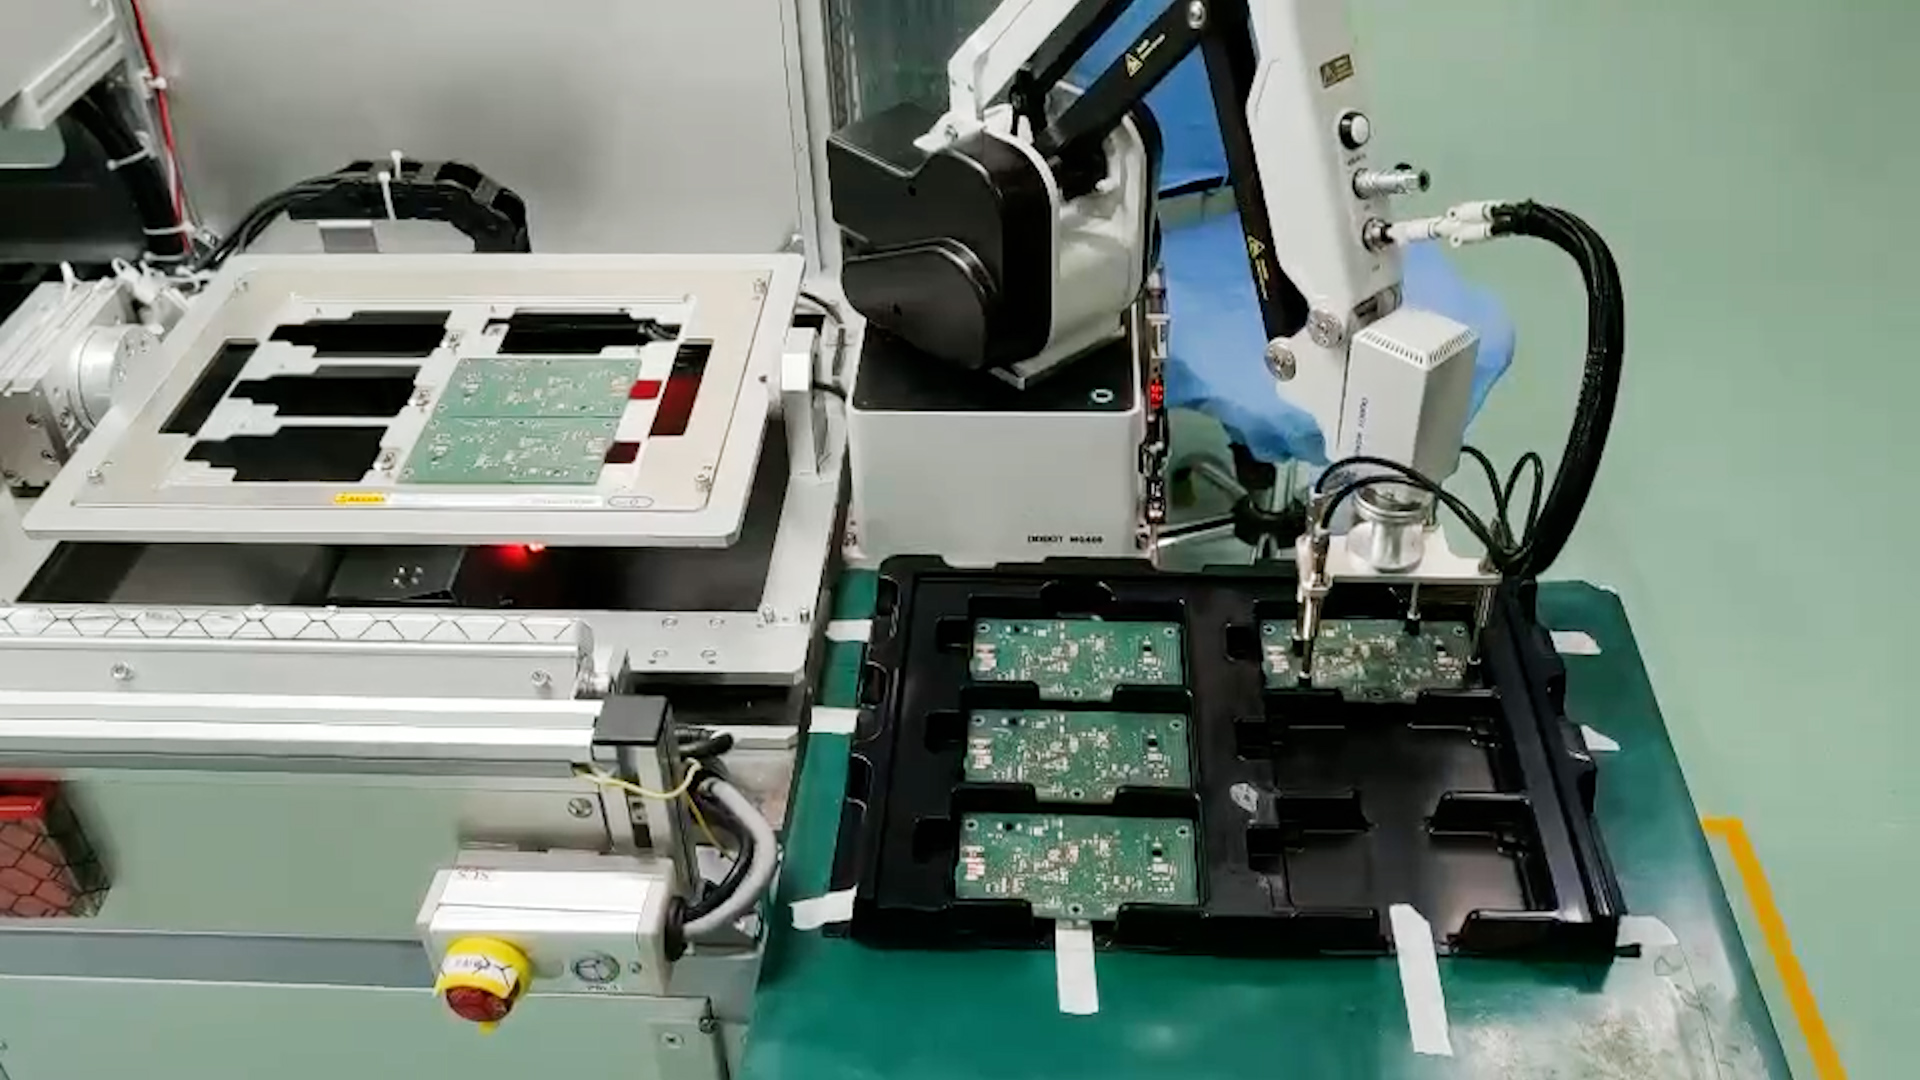 Automated Sorting of Printed Circuit Boards